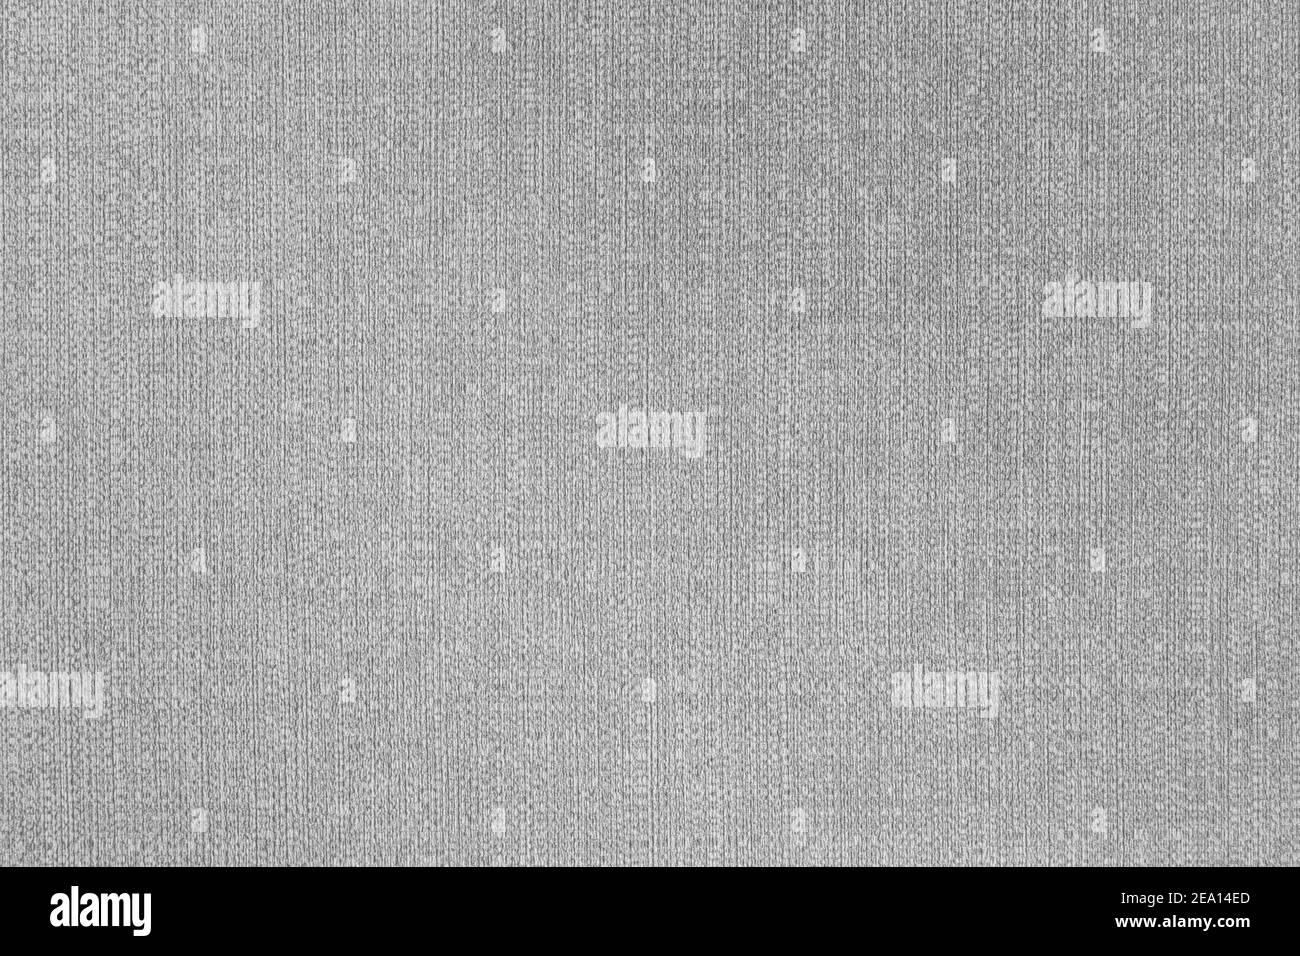 Silver background texture of cotton wool, paper tissue Stock Photo